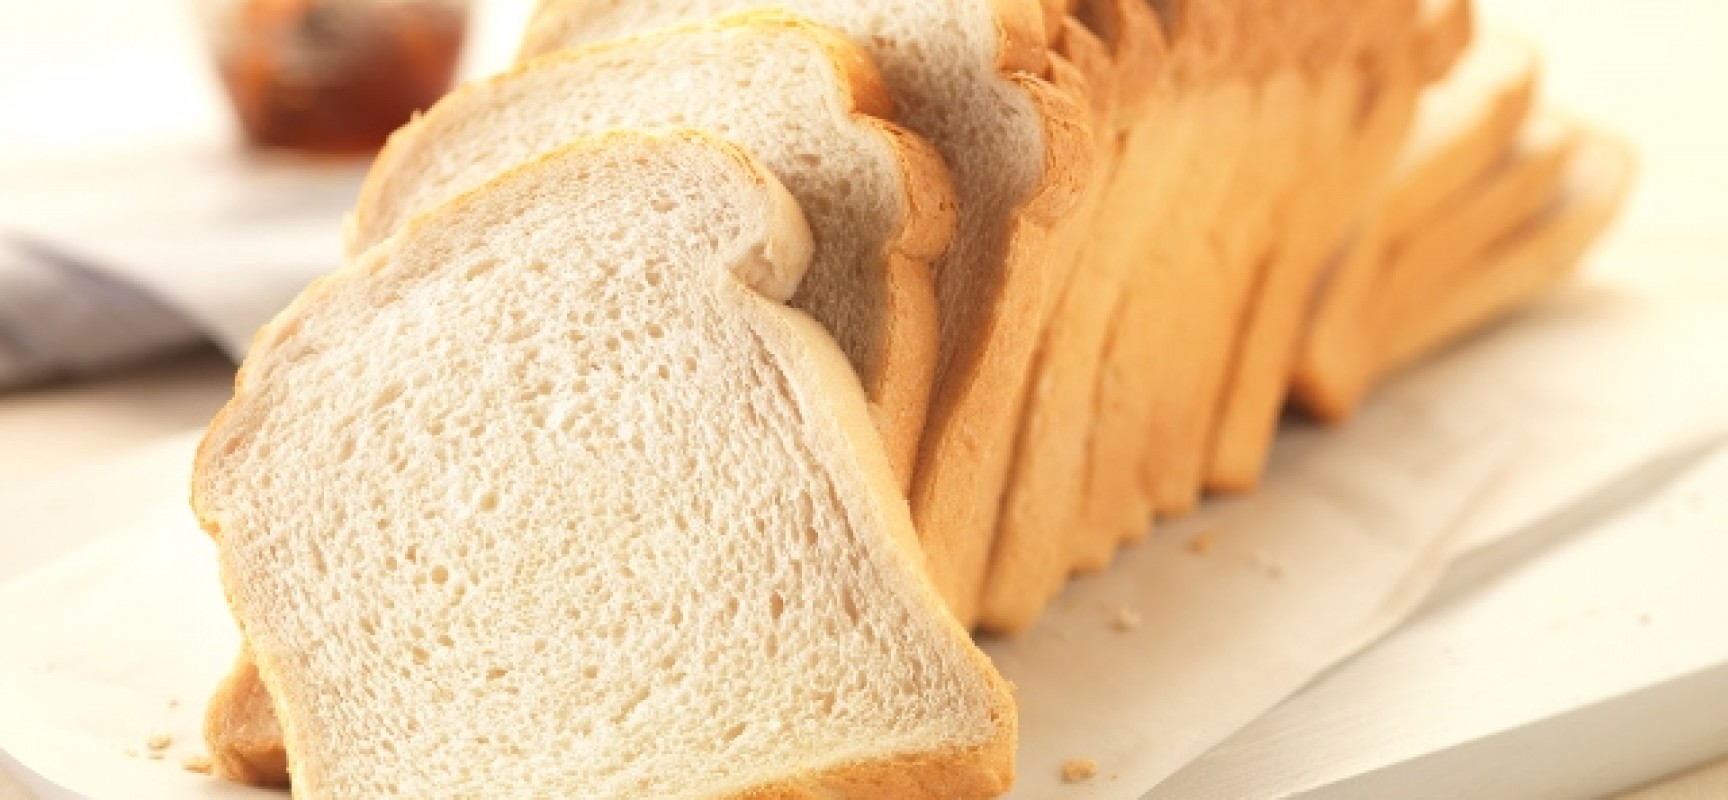 Here is why you should stop eating bread